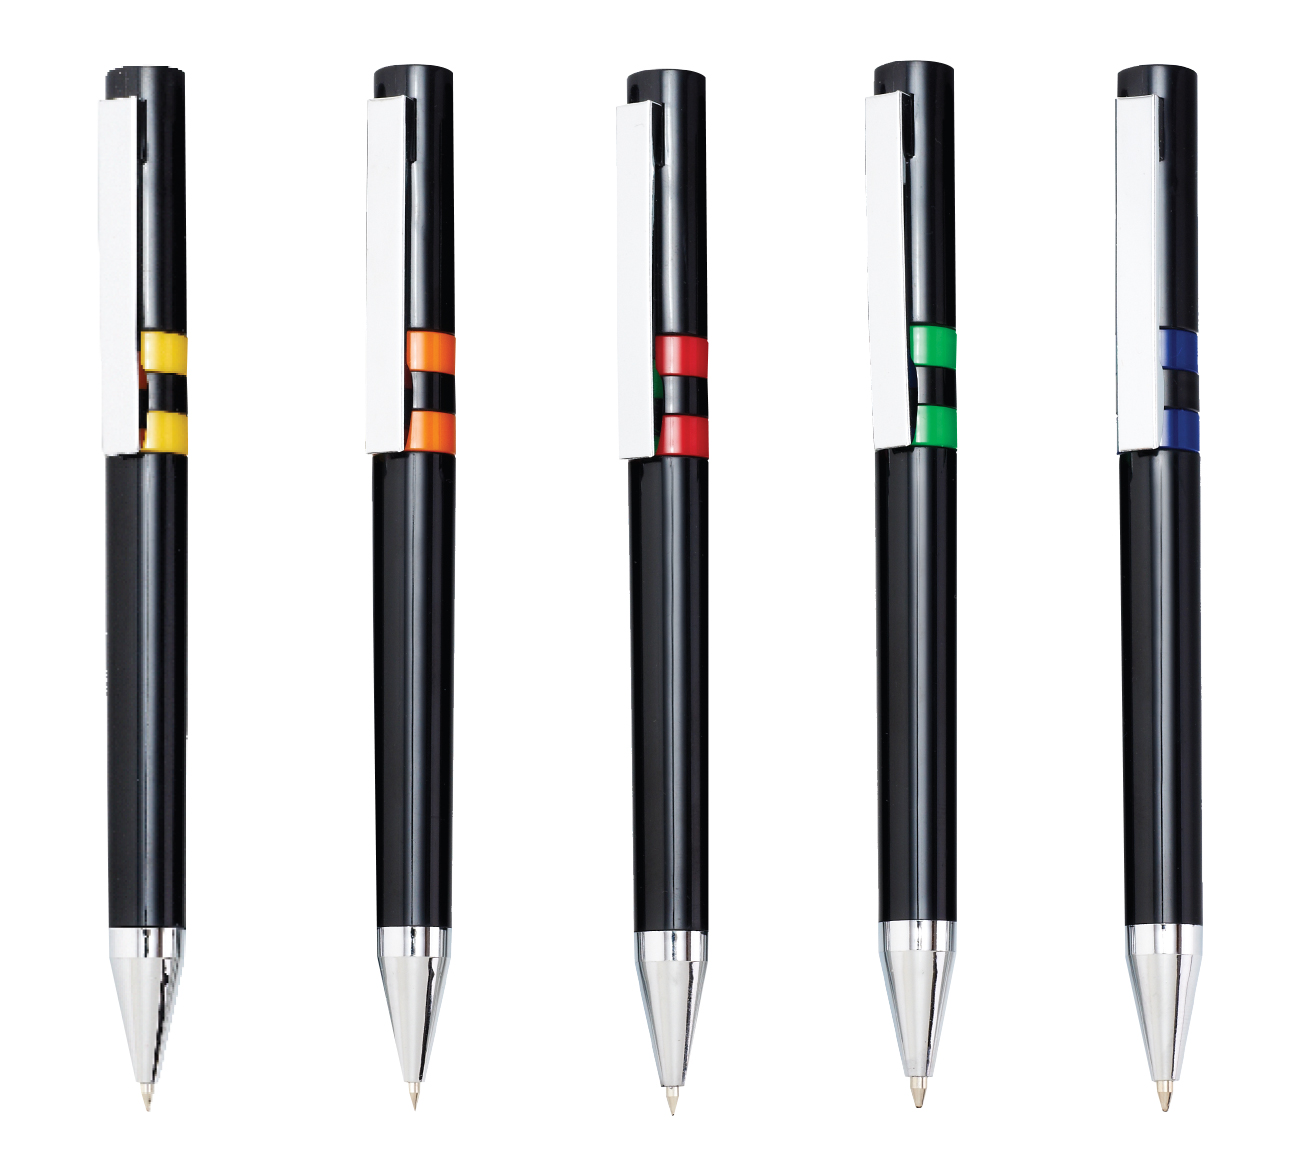 Deco Black Pen - Avail in: Orange, Red, Green, Yellow, or Blue